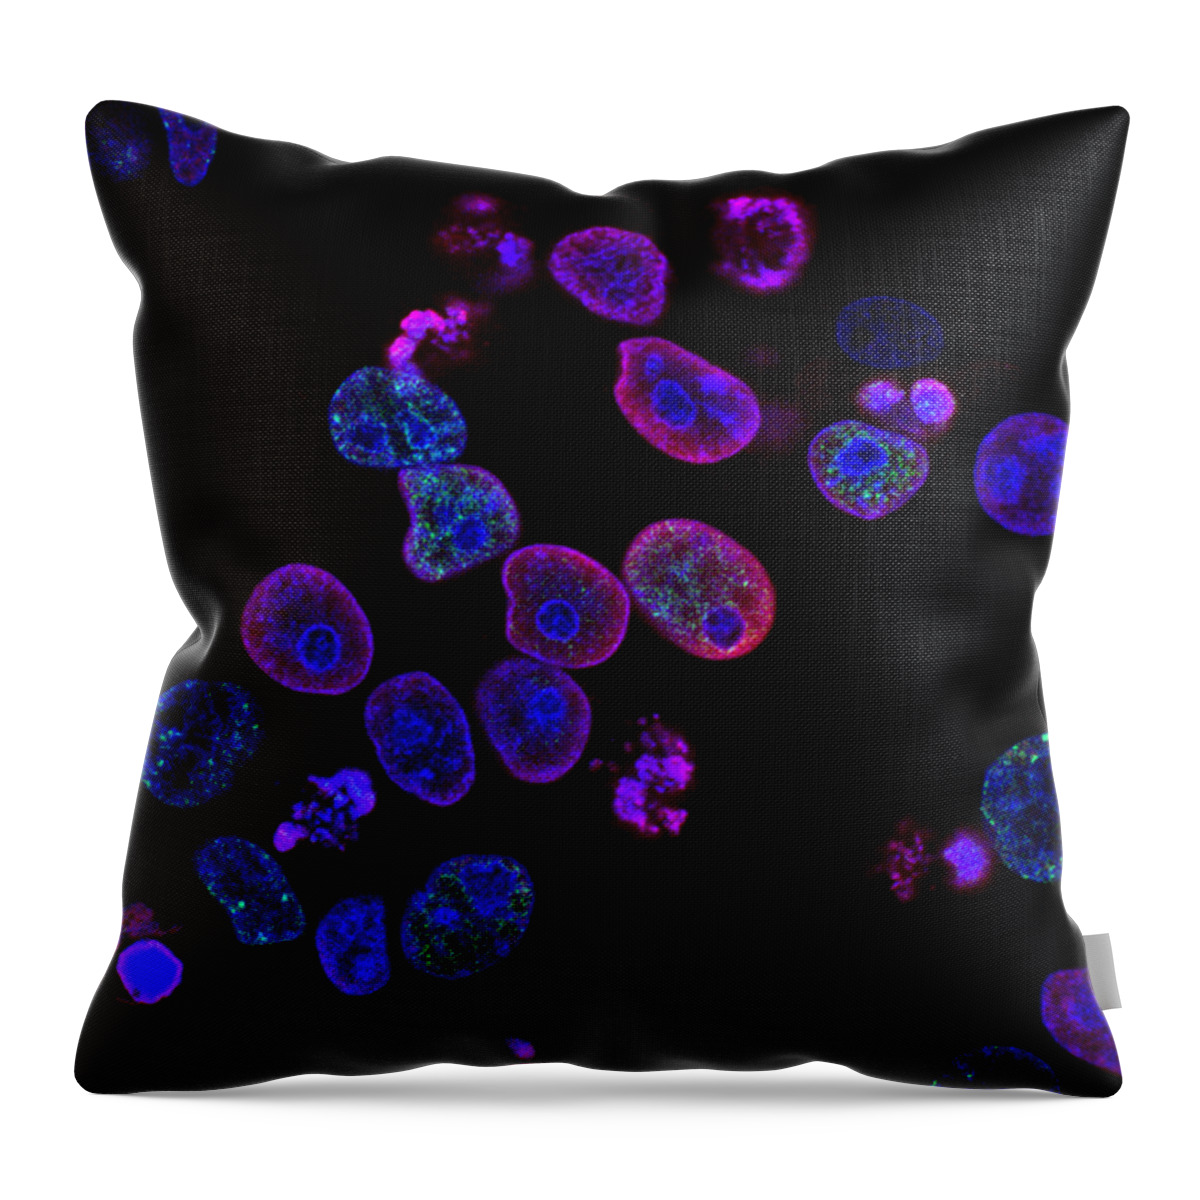 Science Throw Pillow featuring the photograph Colorectal Cancer Cells Damaged By Atr by Science Source